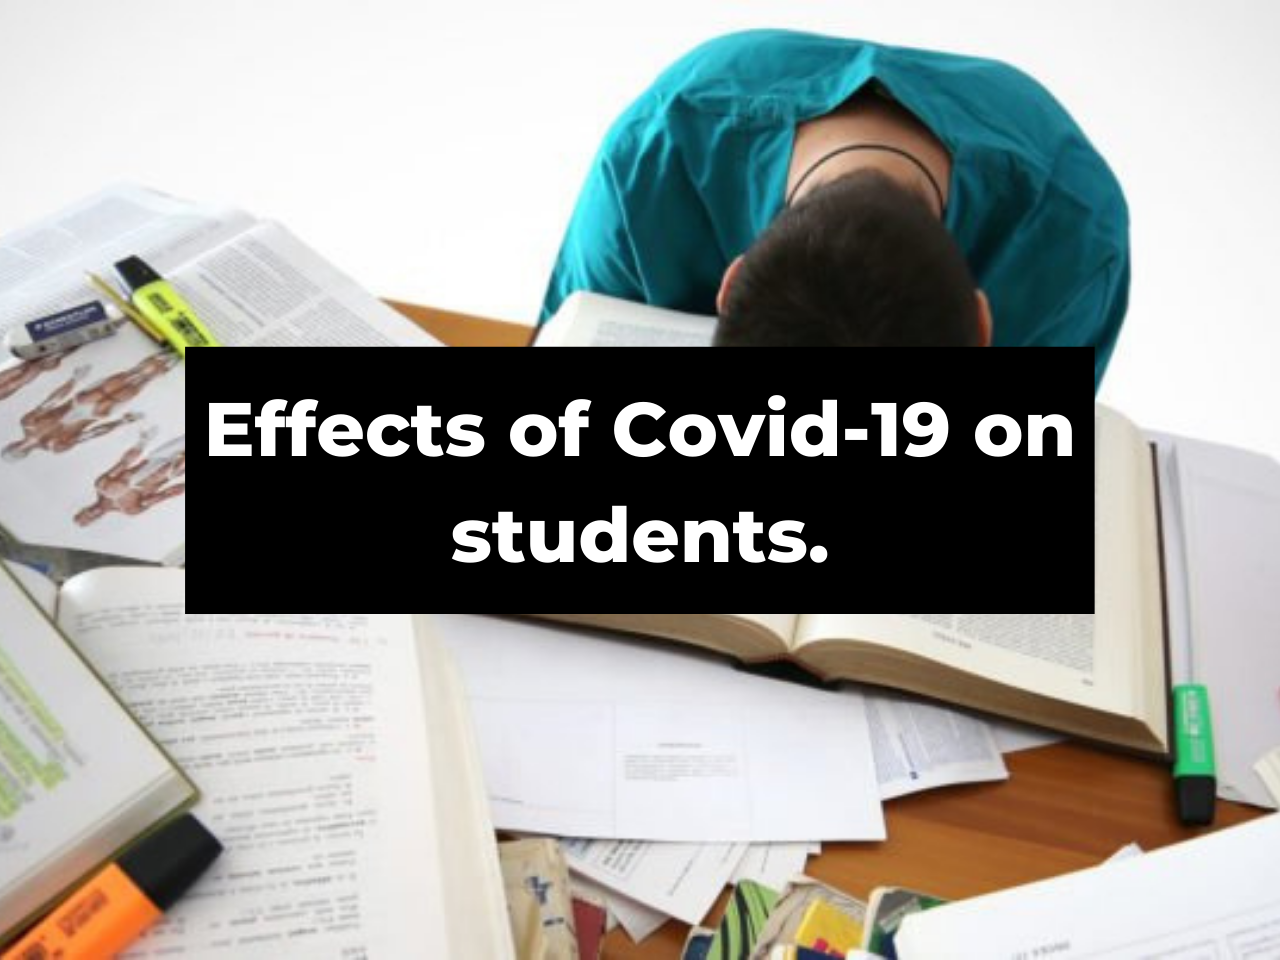 Covid-19 effects on the student population.